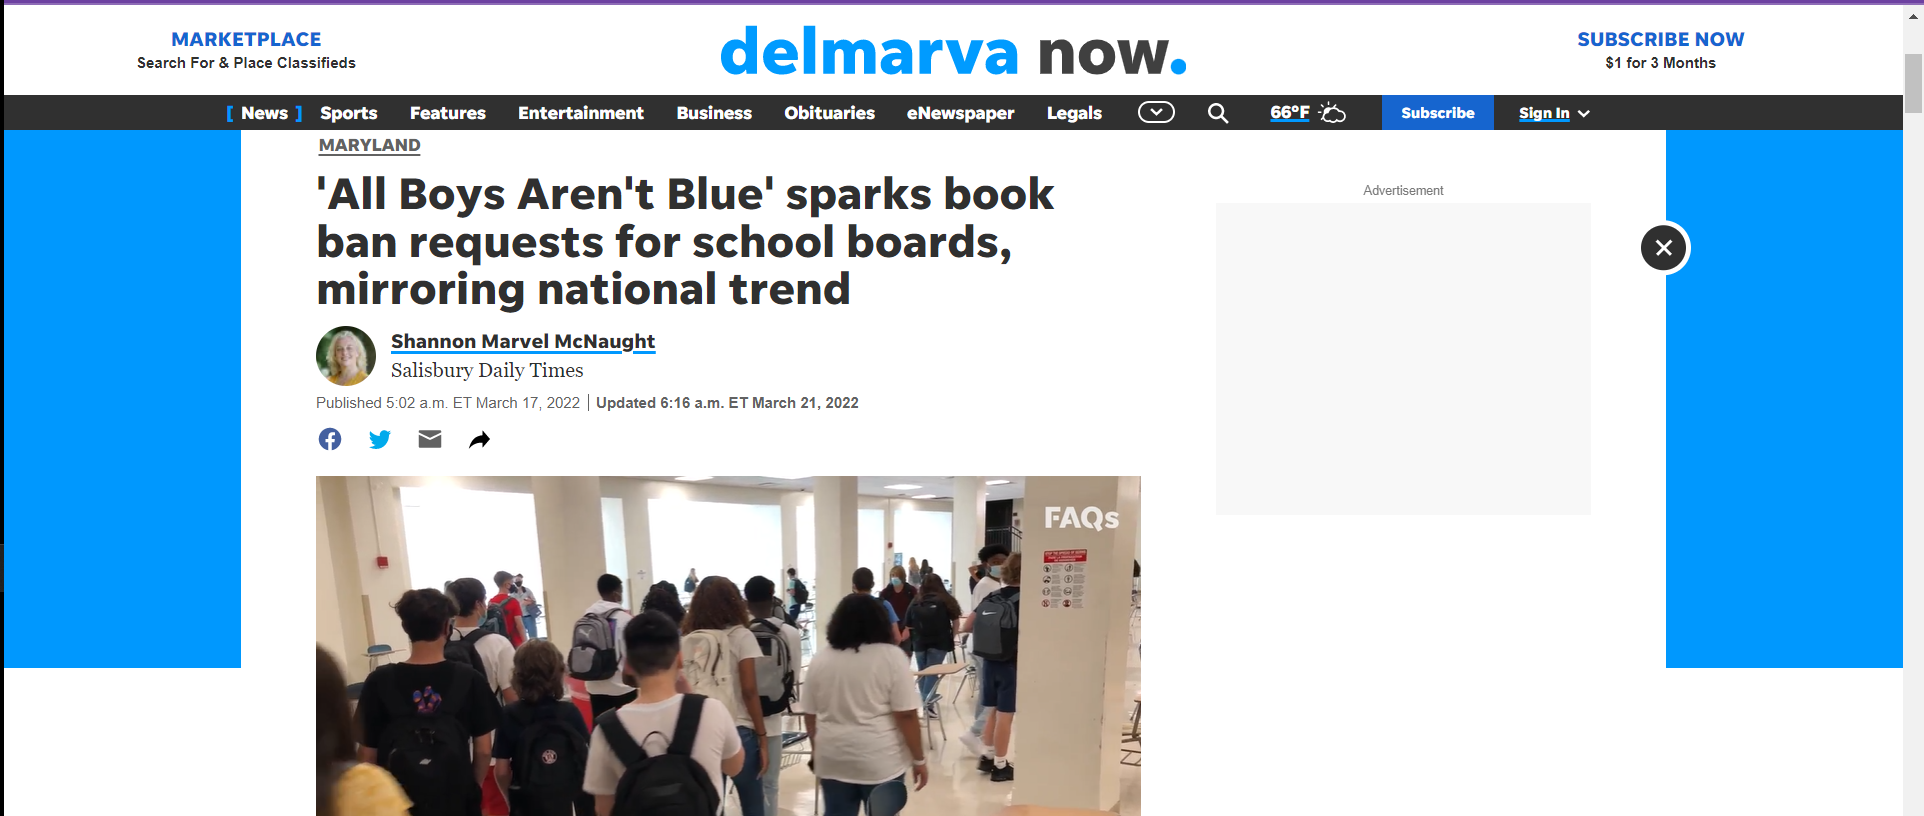 'All Boys Aren't Blue' sparks book ban requests for school boards, mirroring national trend